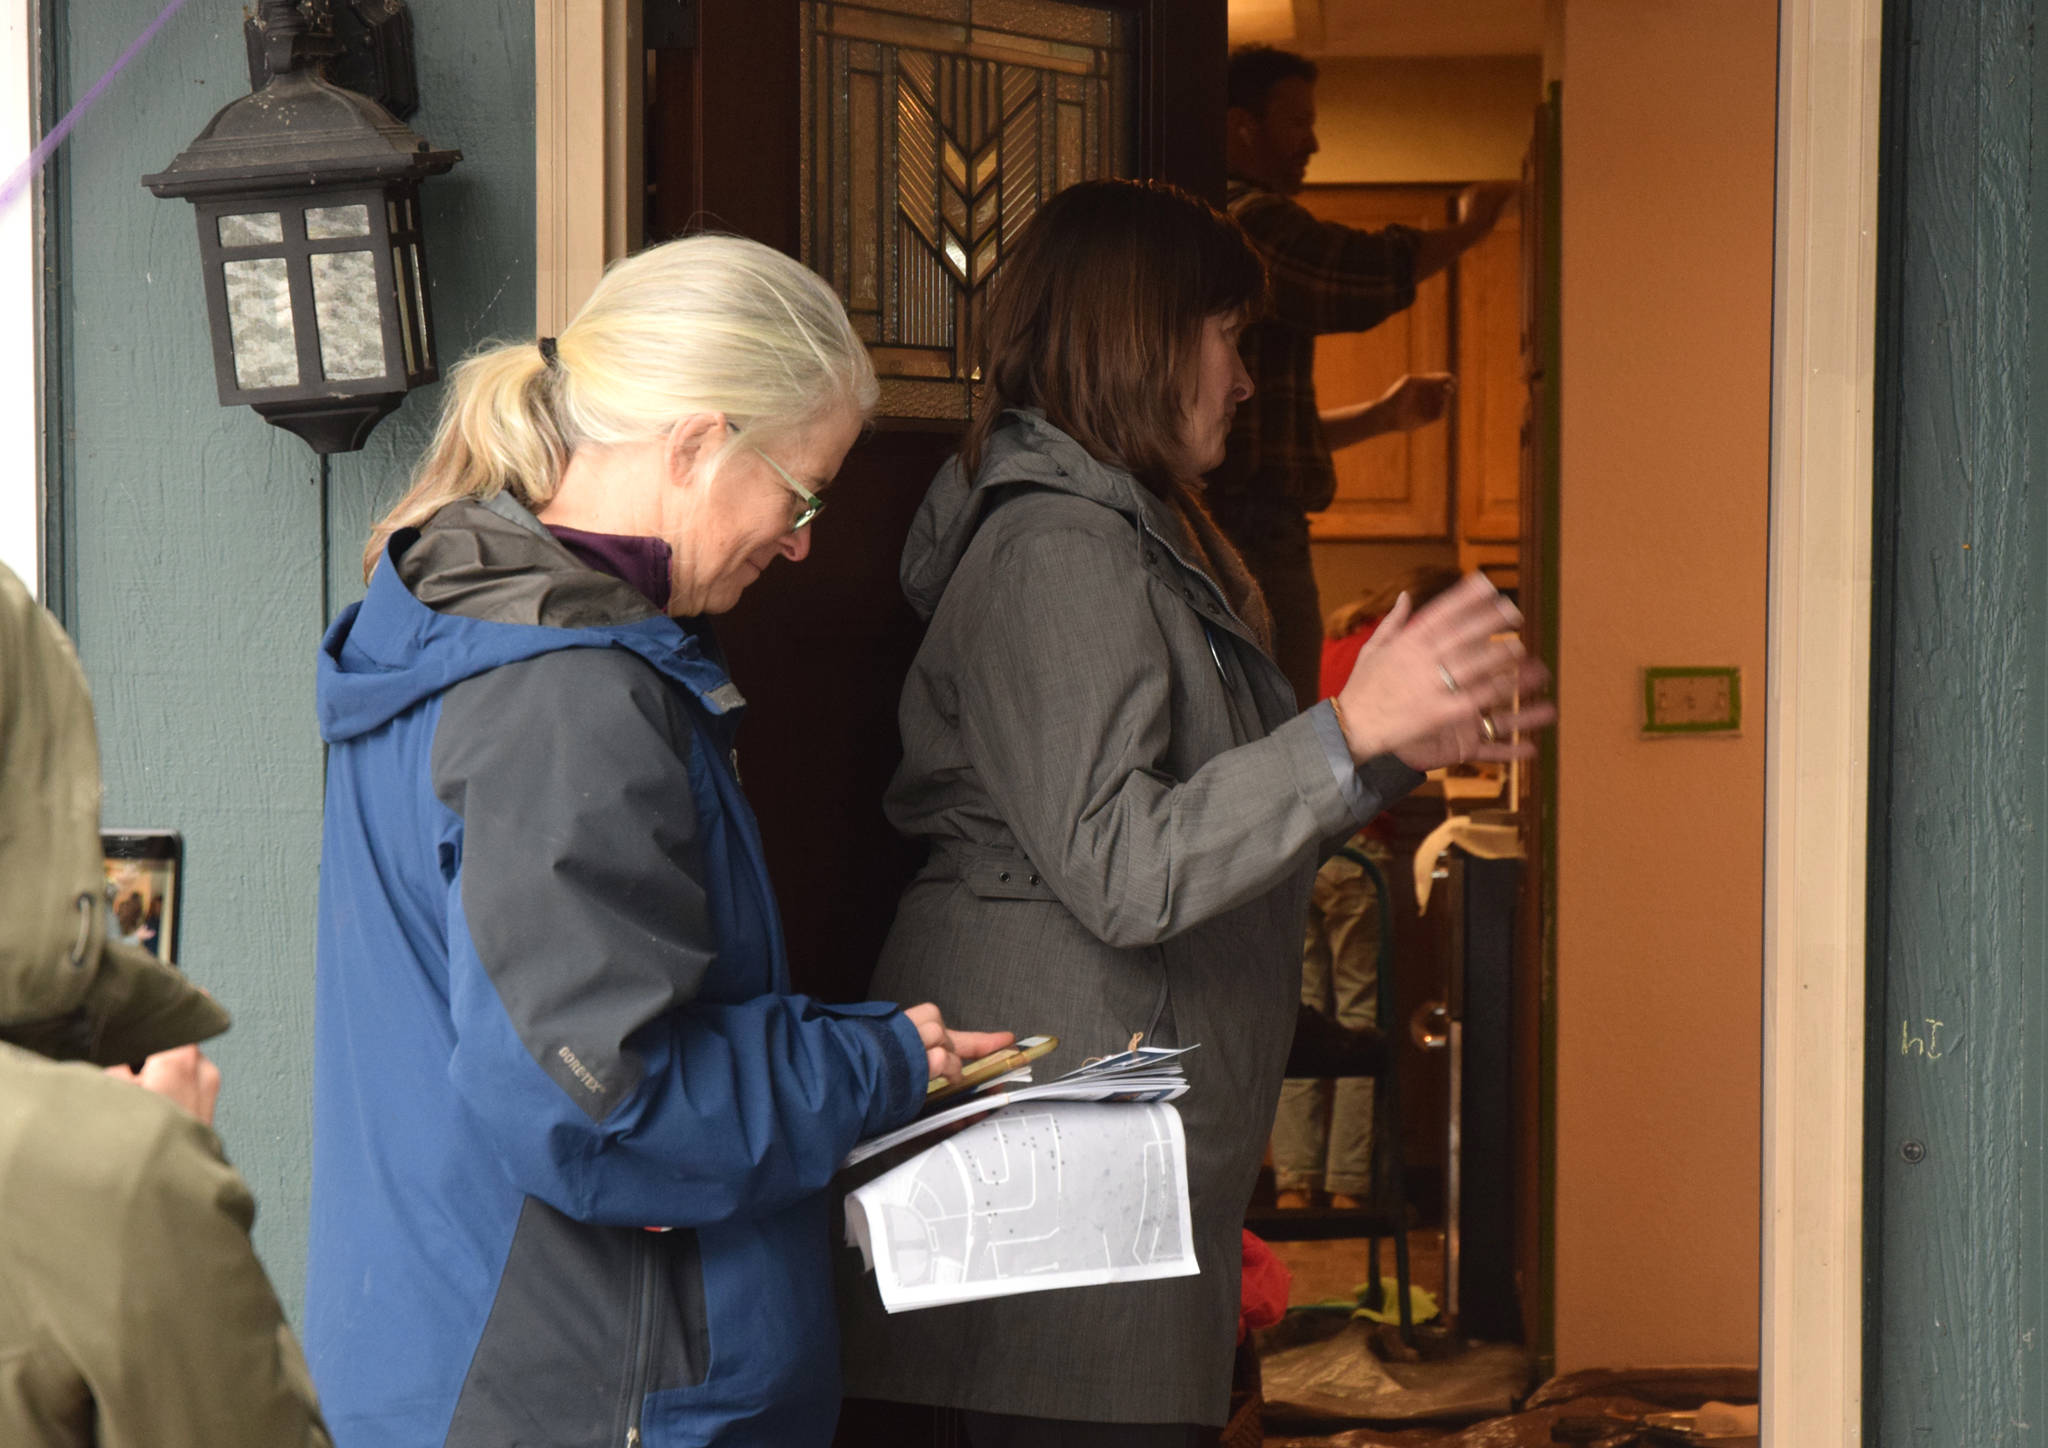 Alyse Galvin, Alaska’s independent candidate for U.S. House of Representatives, talks to a woman named Amanda (not pictured) while going door to door for support Sunday, Nov. 4, 2018 in the Mendenhall Valley. Galvin was in Juneau for a final campaign stop ahead of the election. (James Brooks | Juneau Empire)